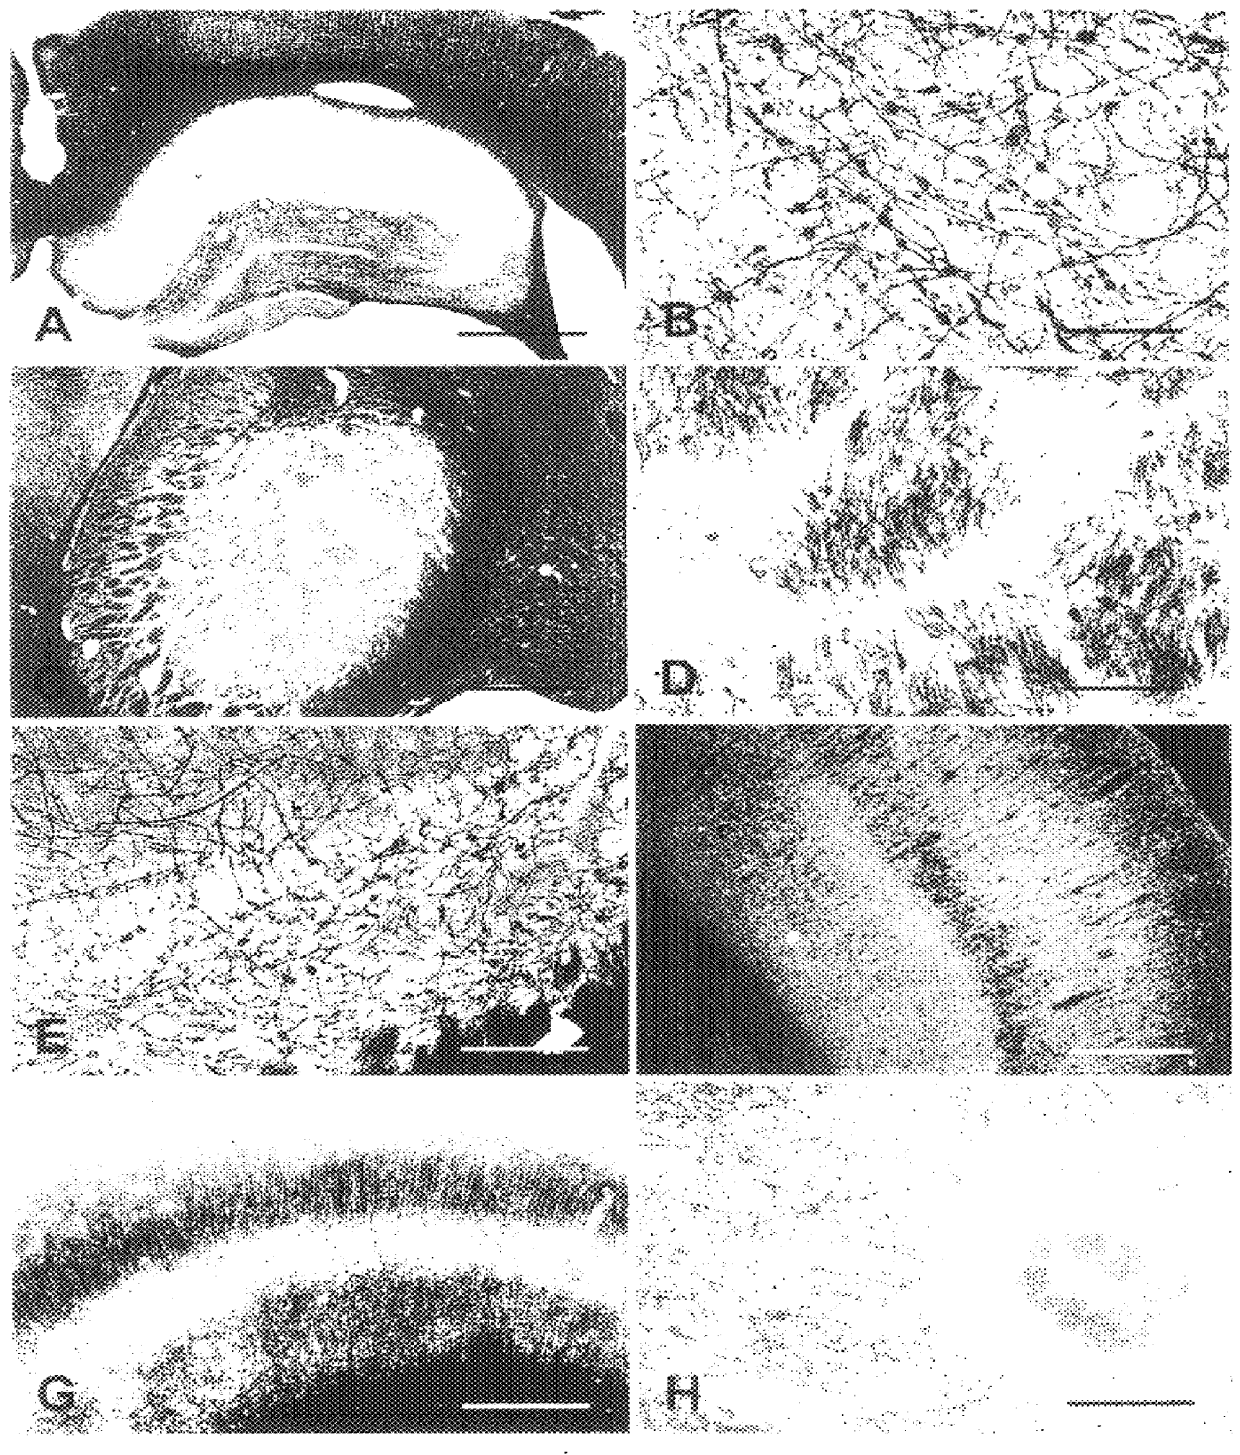 Histochemical labeling stain for myelin in brain tissue